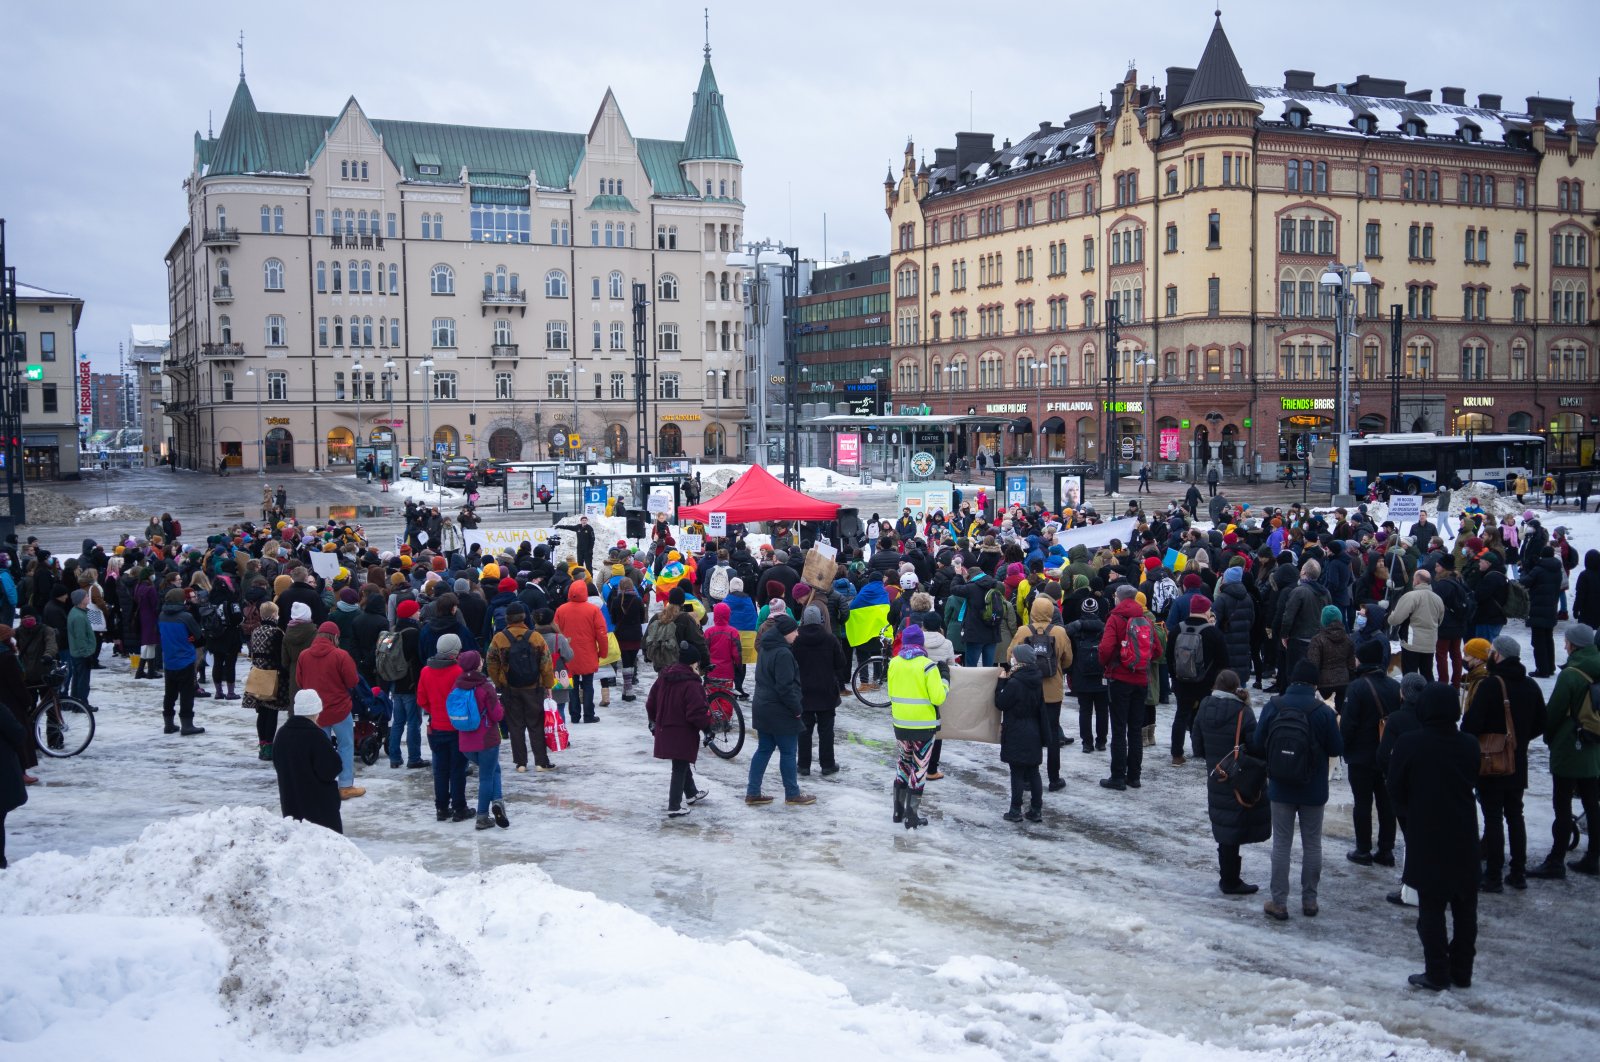 People protest against the Russian invasion in Ukraine, in the center of Tampere, Finland, Feb. 24, 2022. (Reuters Photo)